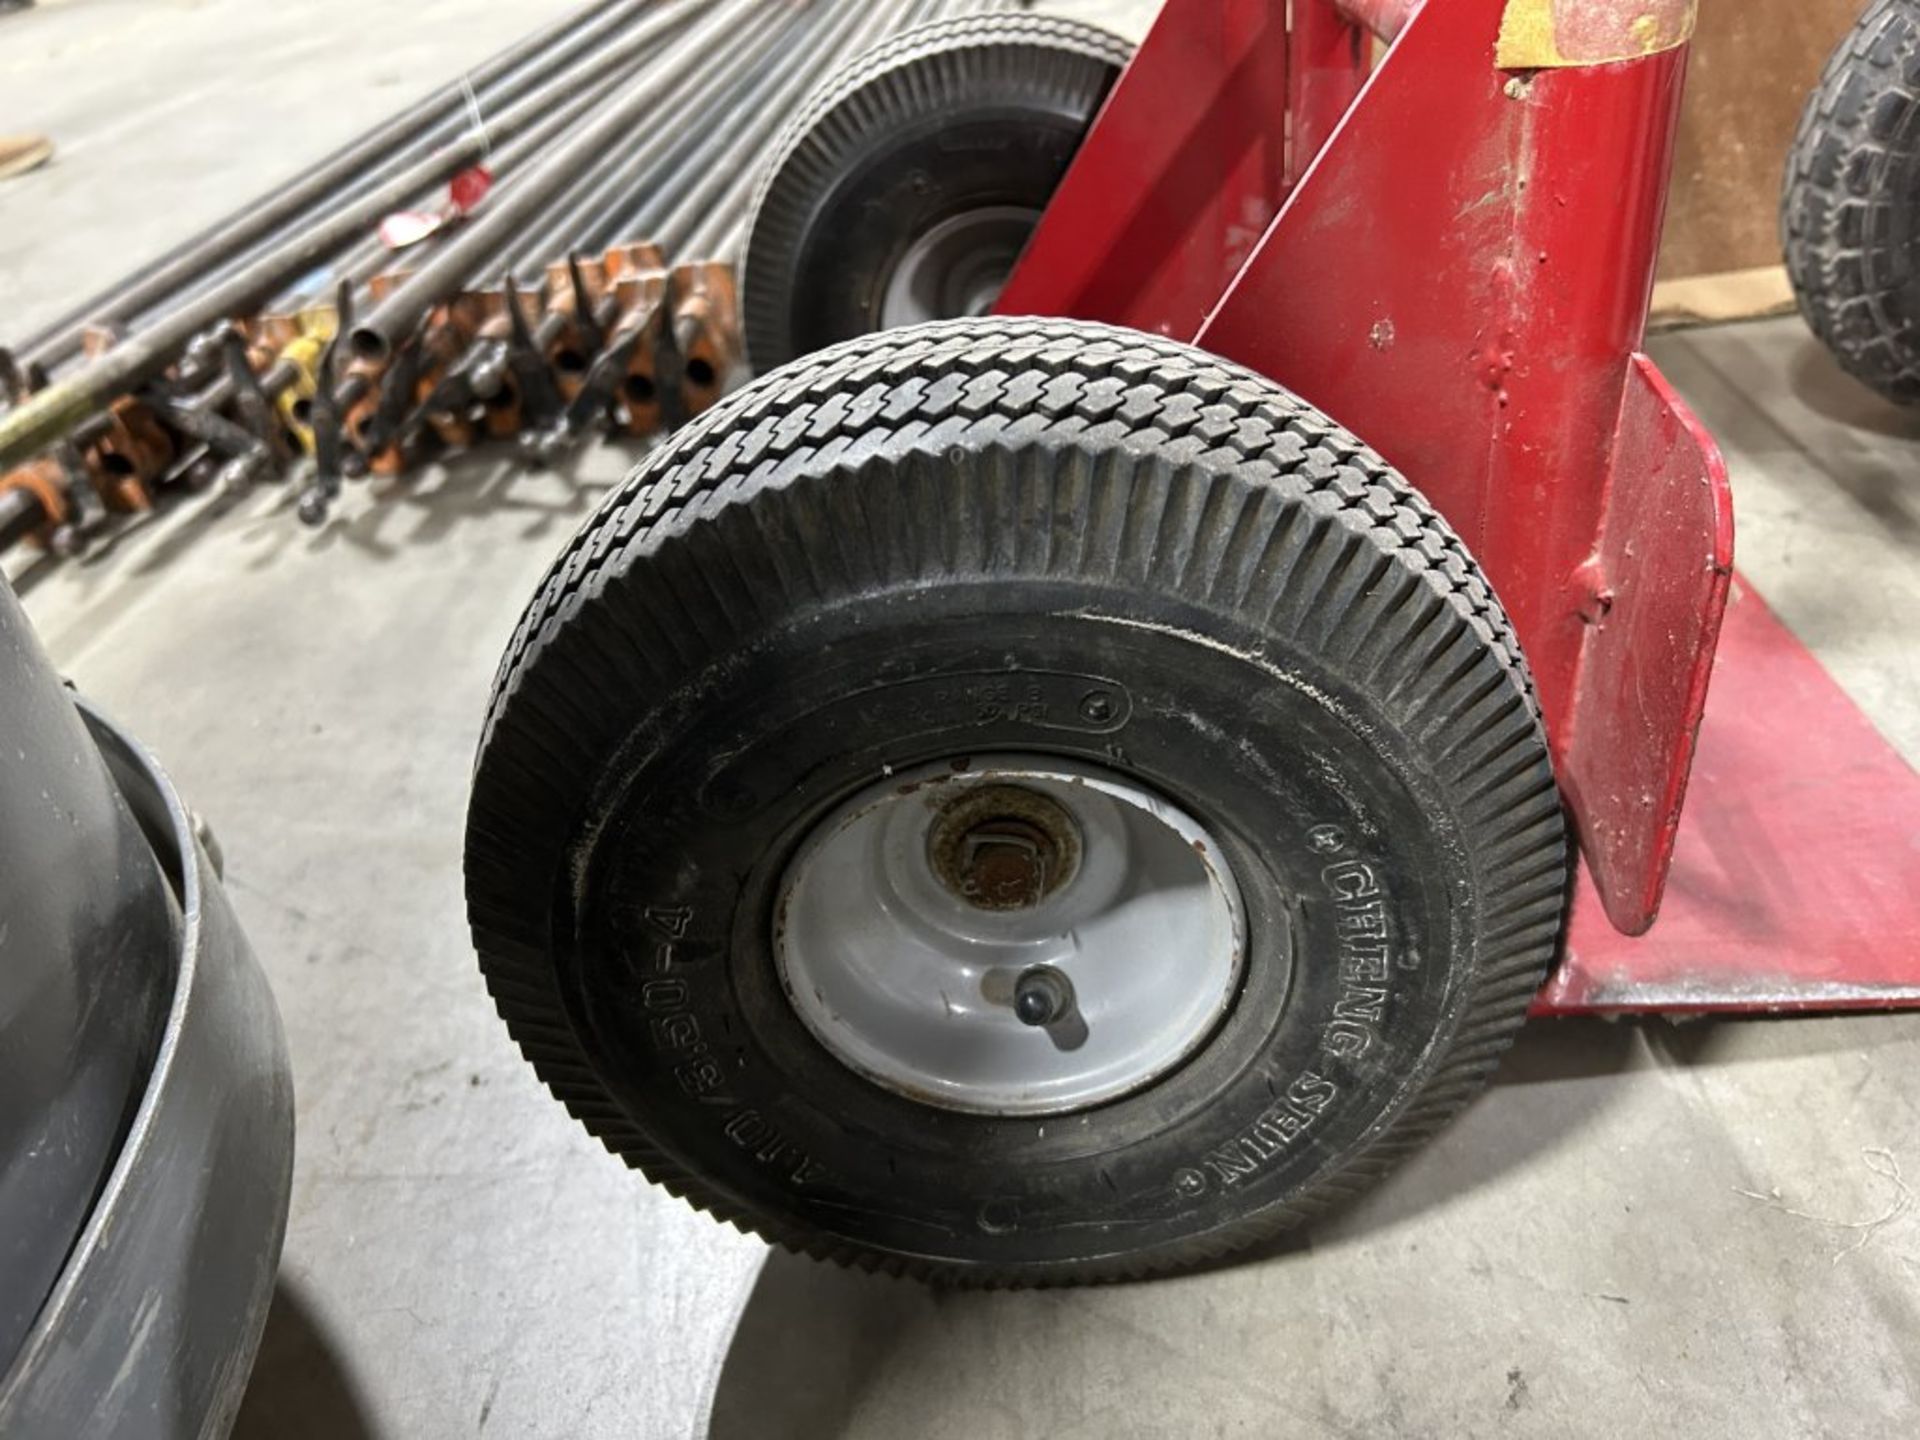 HAND TRUCKS, WITH PNEUMATIC TIRES (2) - Image 4 of 5